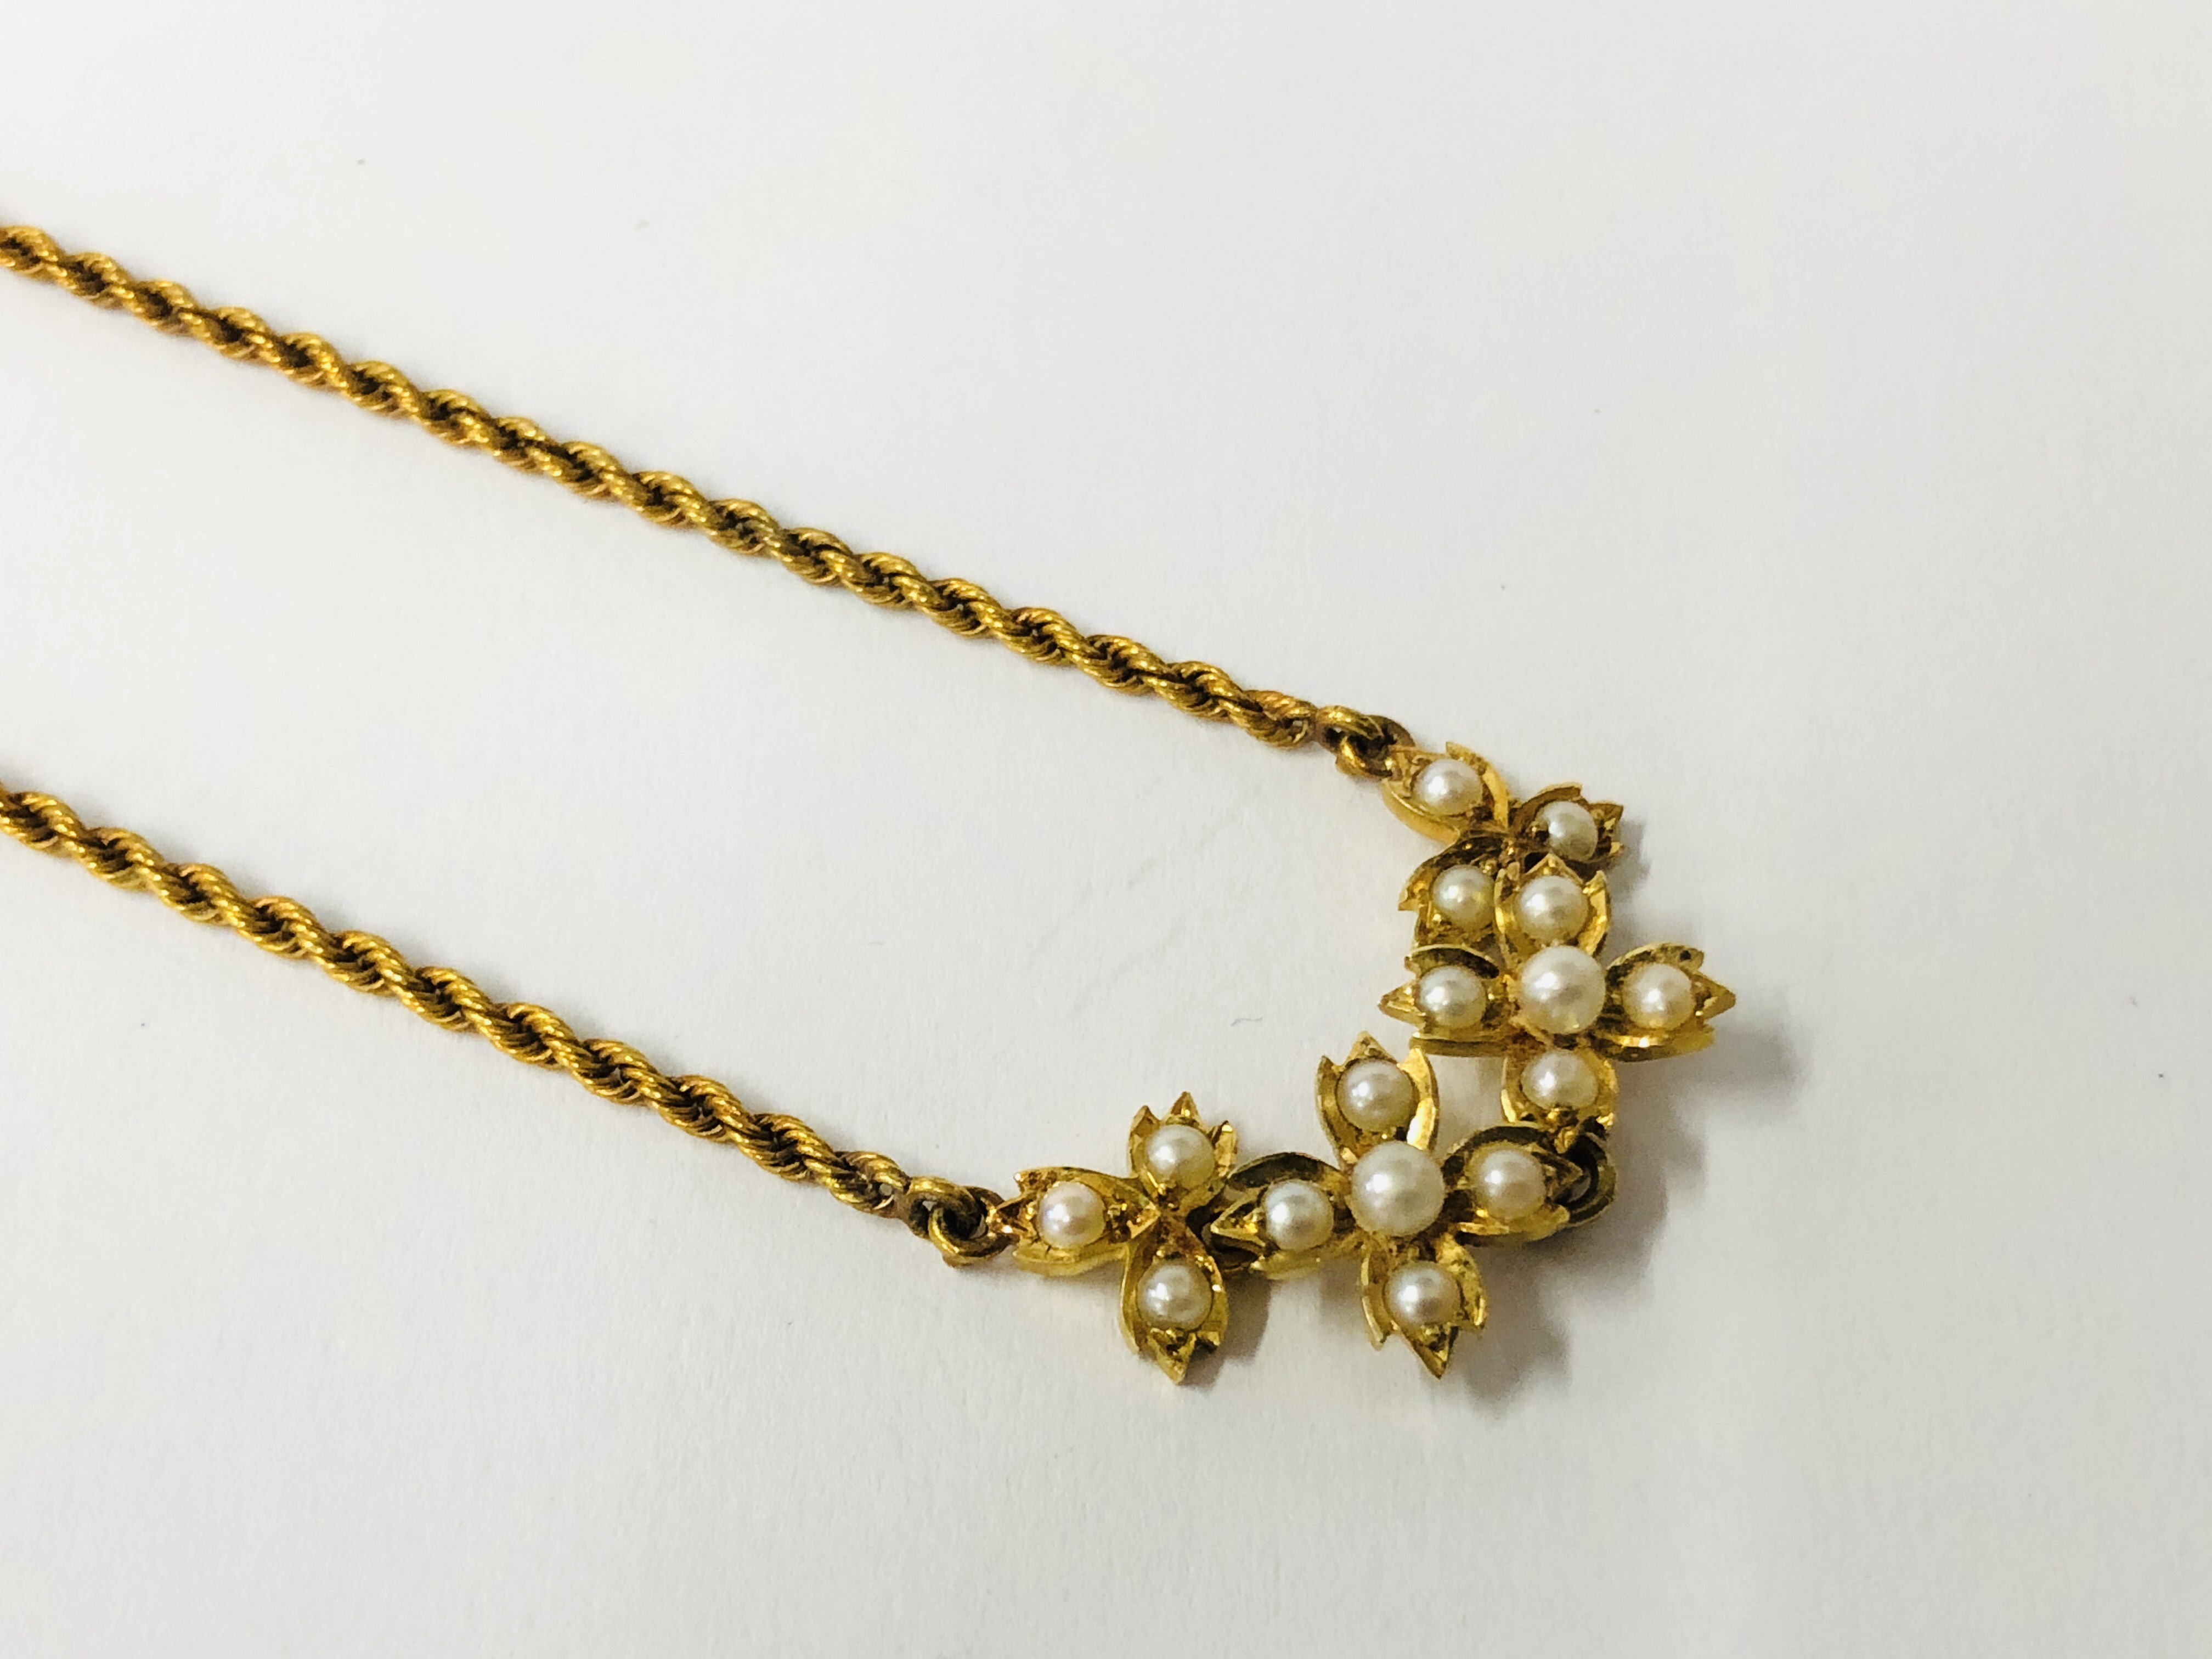 AN ANTIQUE CHILD'S YELLOW METAL ROPE DESIGN NECKLACE SET WITH SEED PEARLS, LENGTH 31CM.